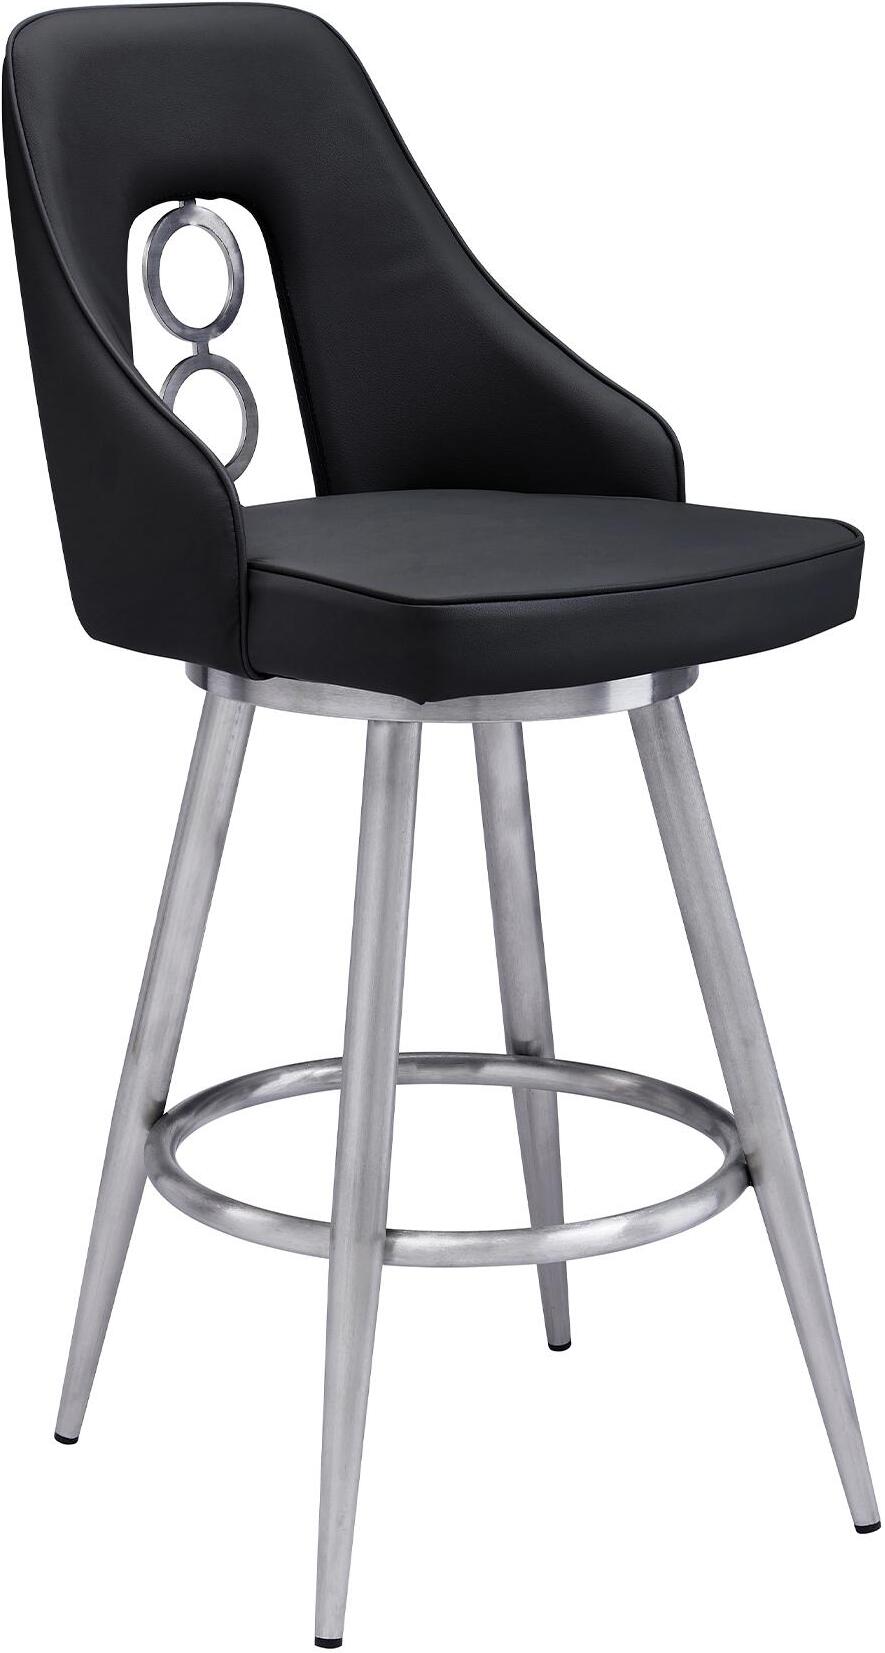 Ruby Brushed Stainless Steel And Black, Jayden Faux Leather Swivel Barstool 26 Counter Height Black And Gray